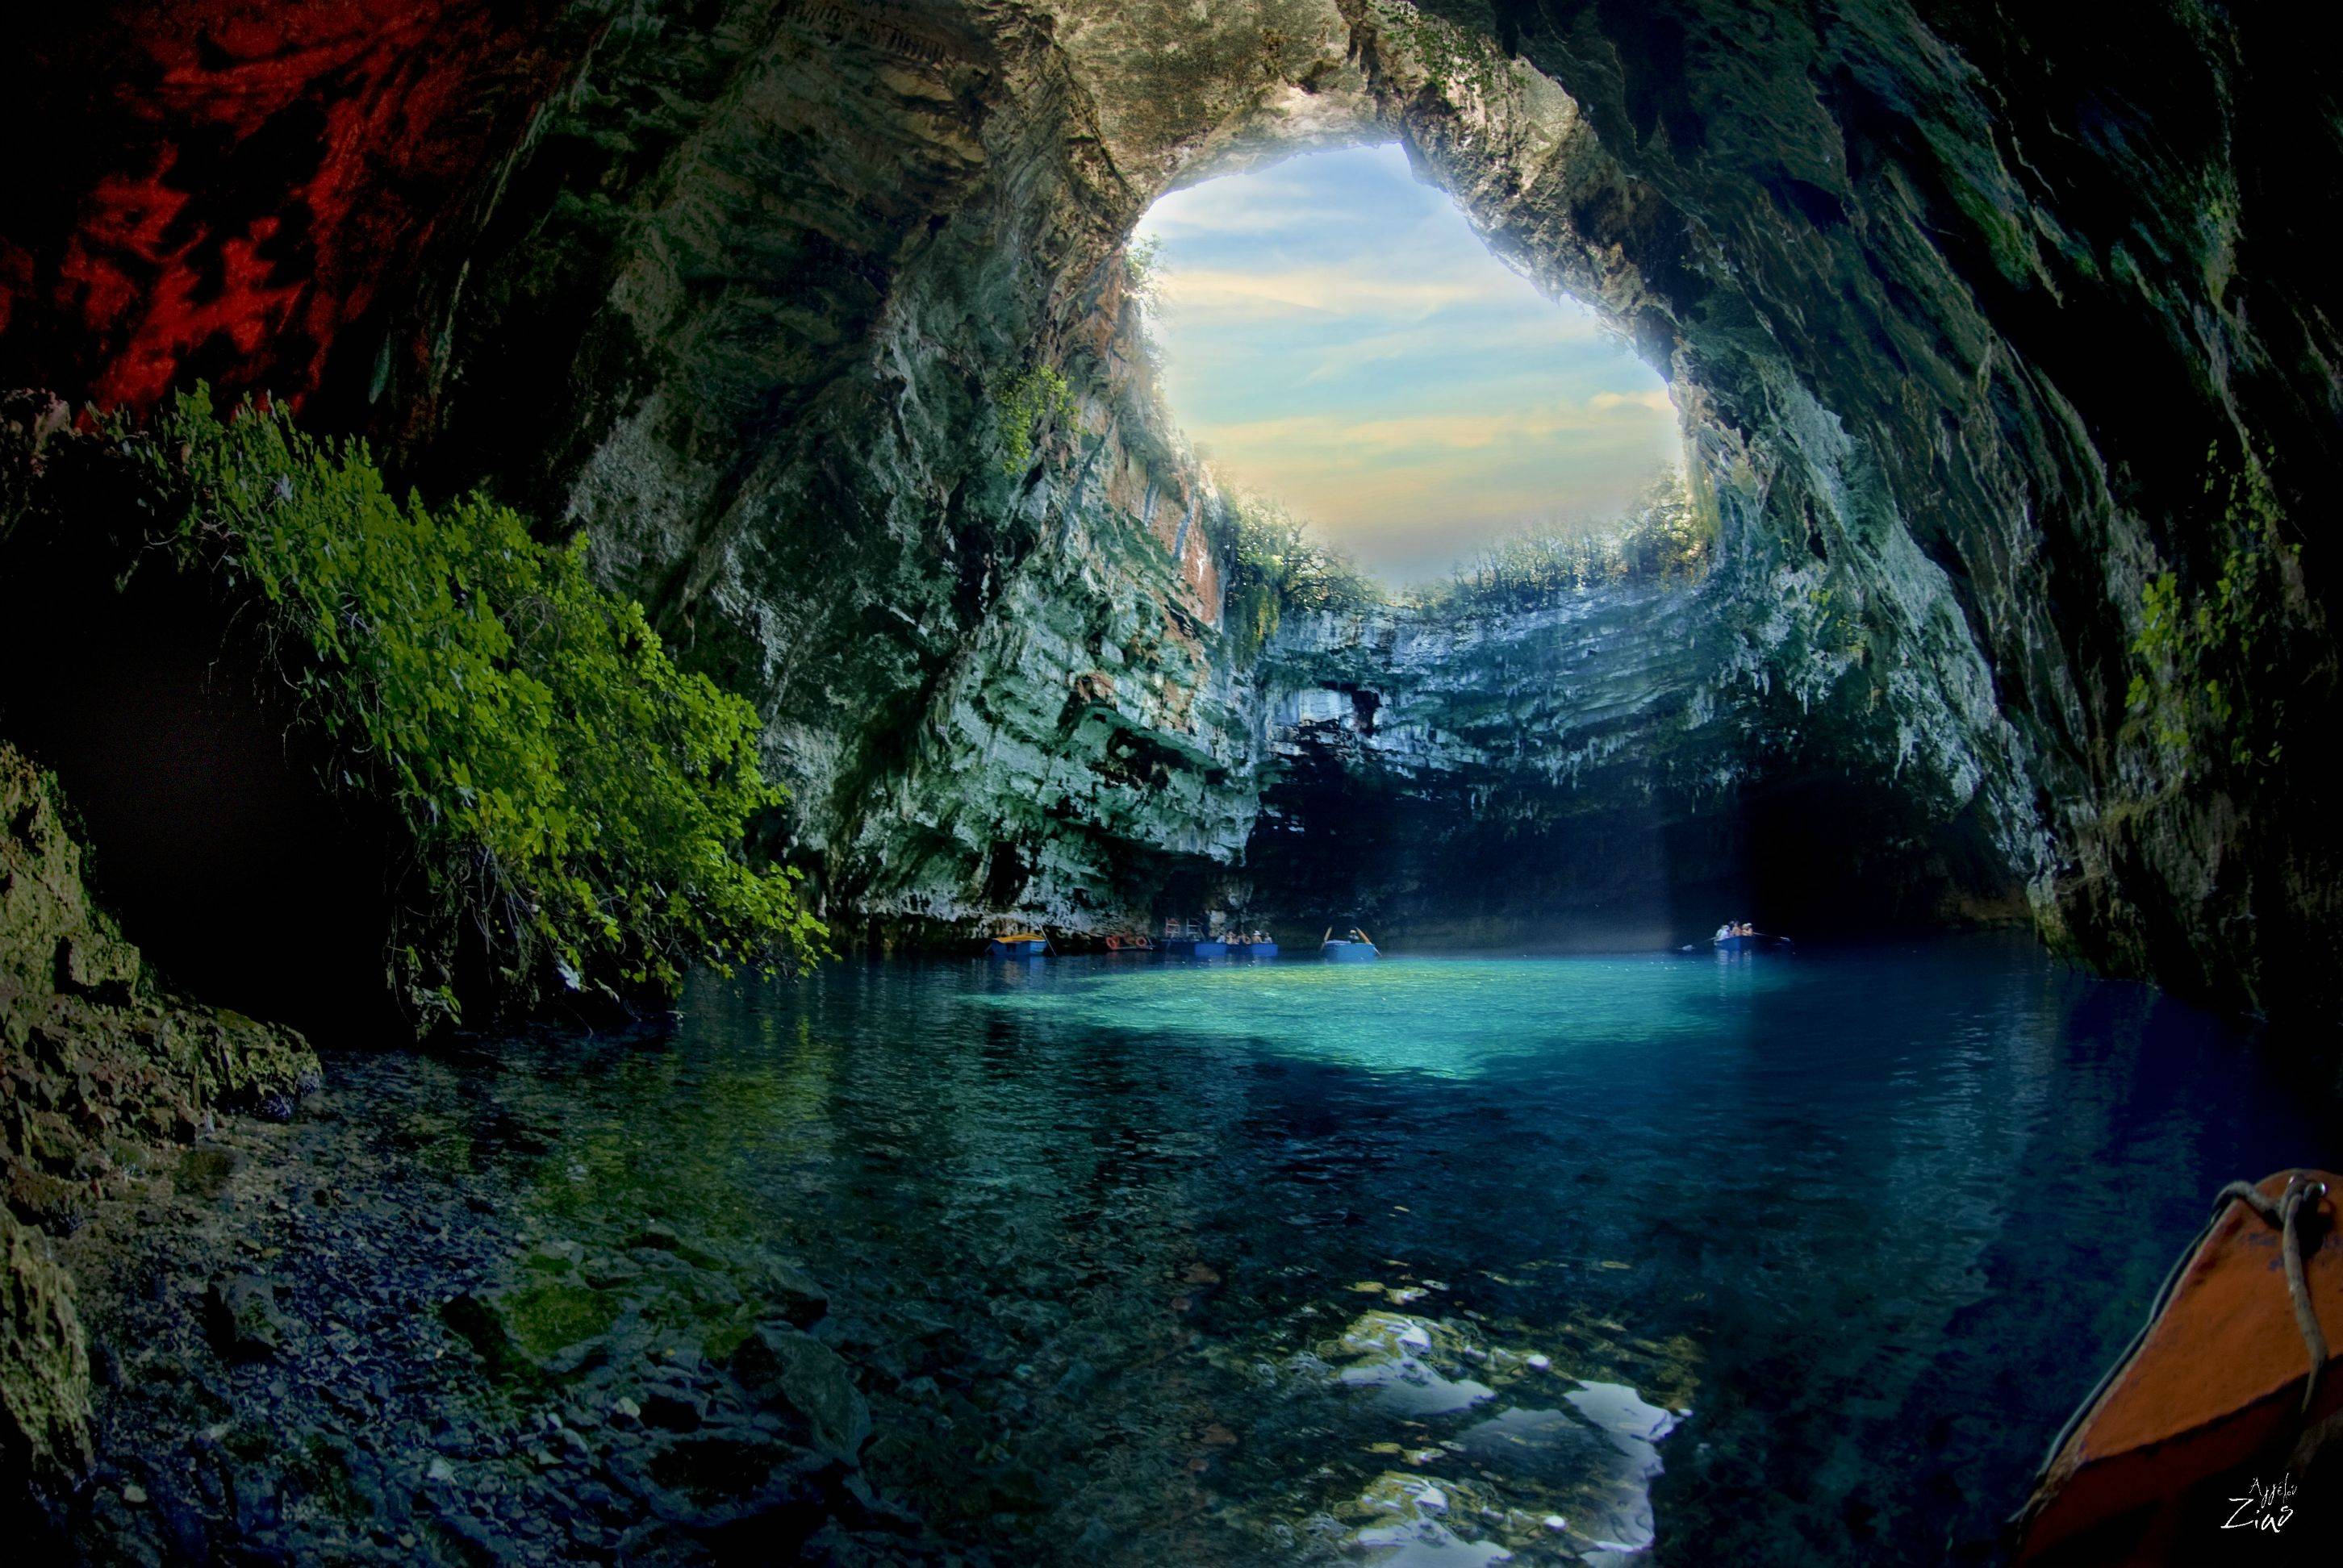 Melissani Cave located in Kefalonia Island, Greece